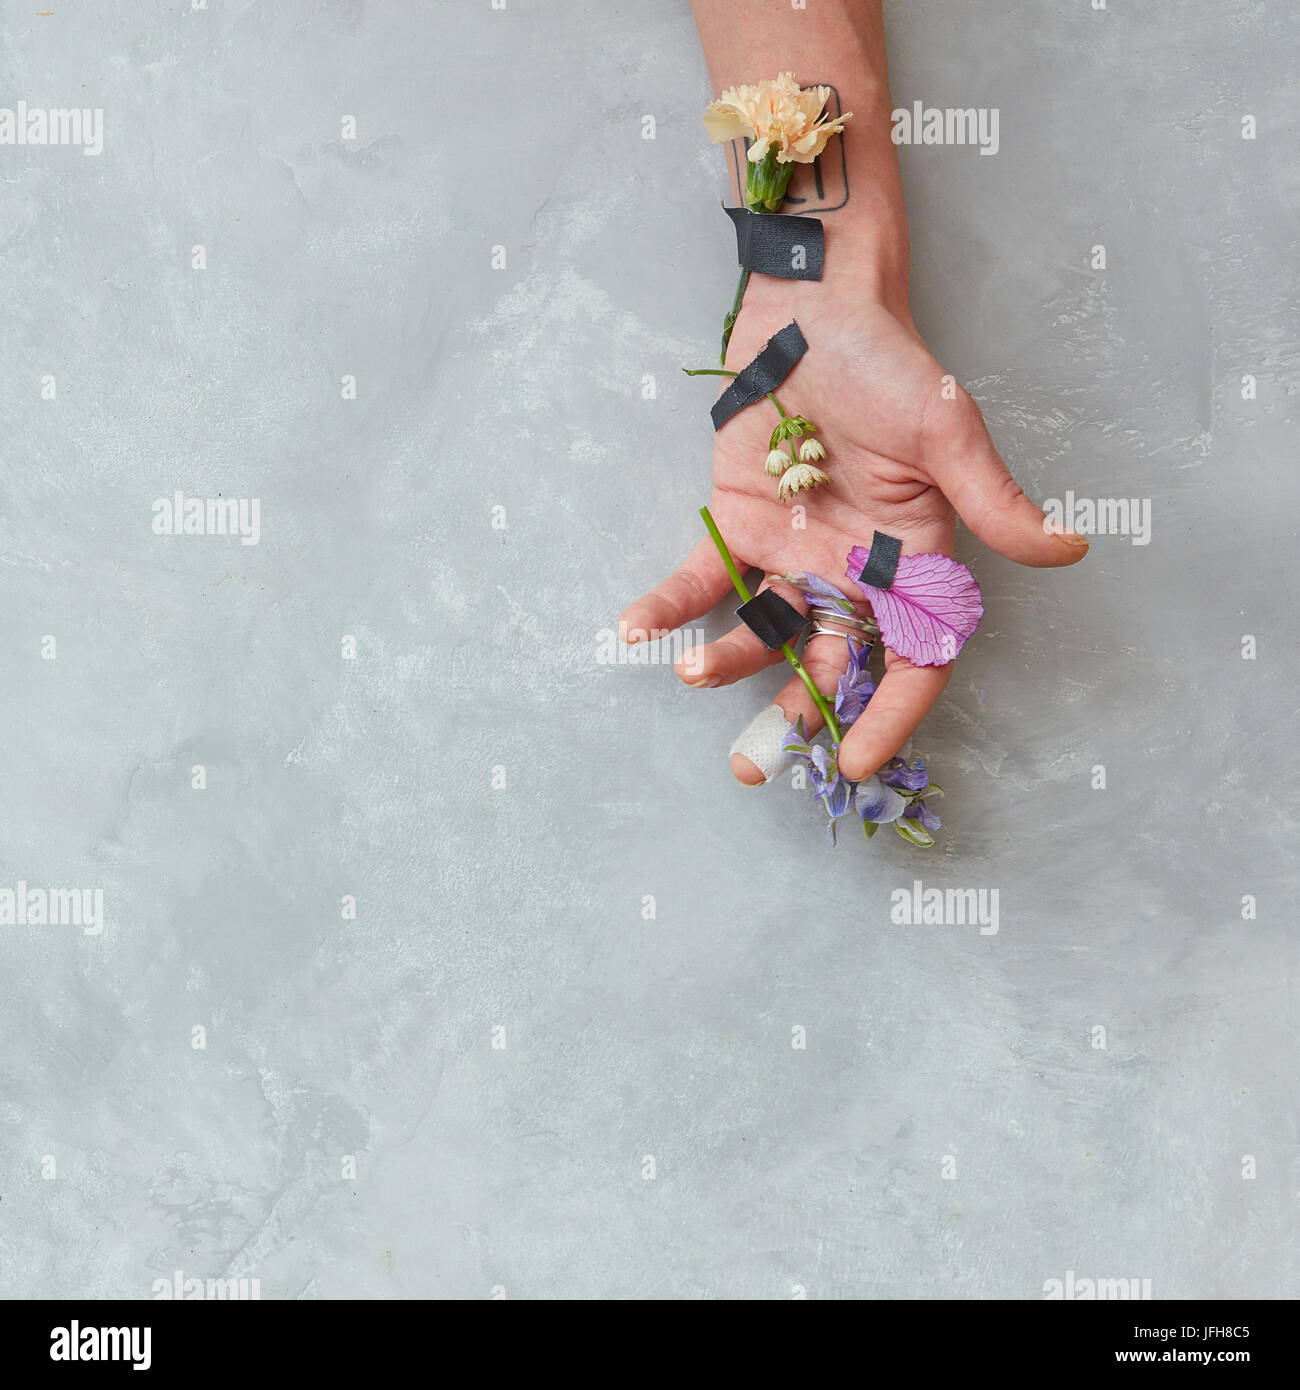 Human being's hand with flowers Stock Photo